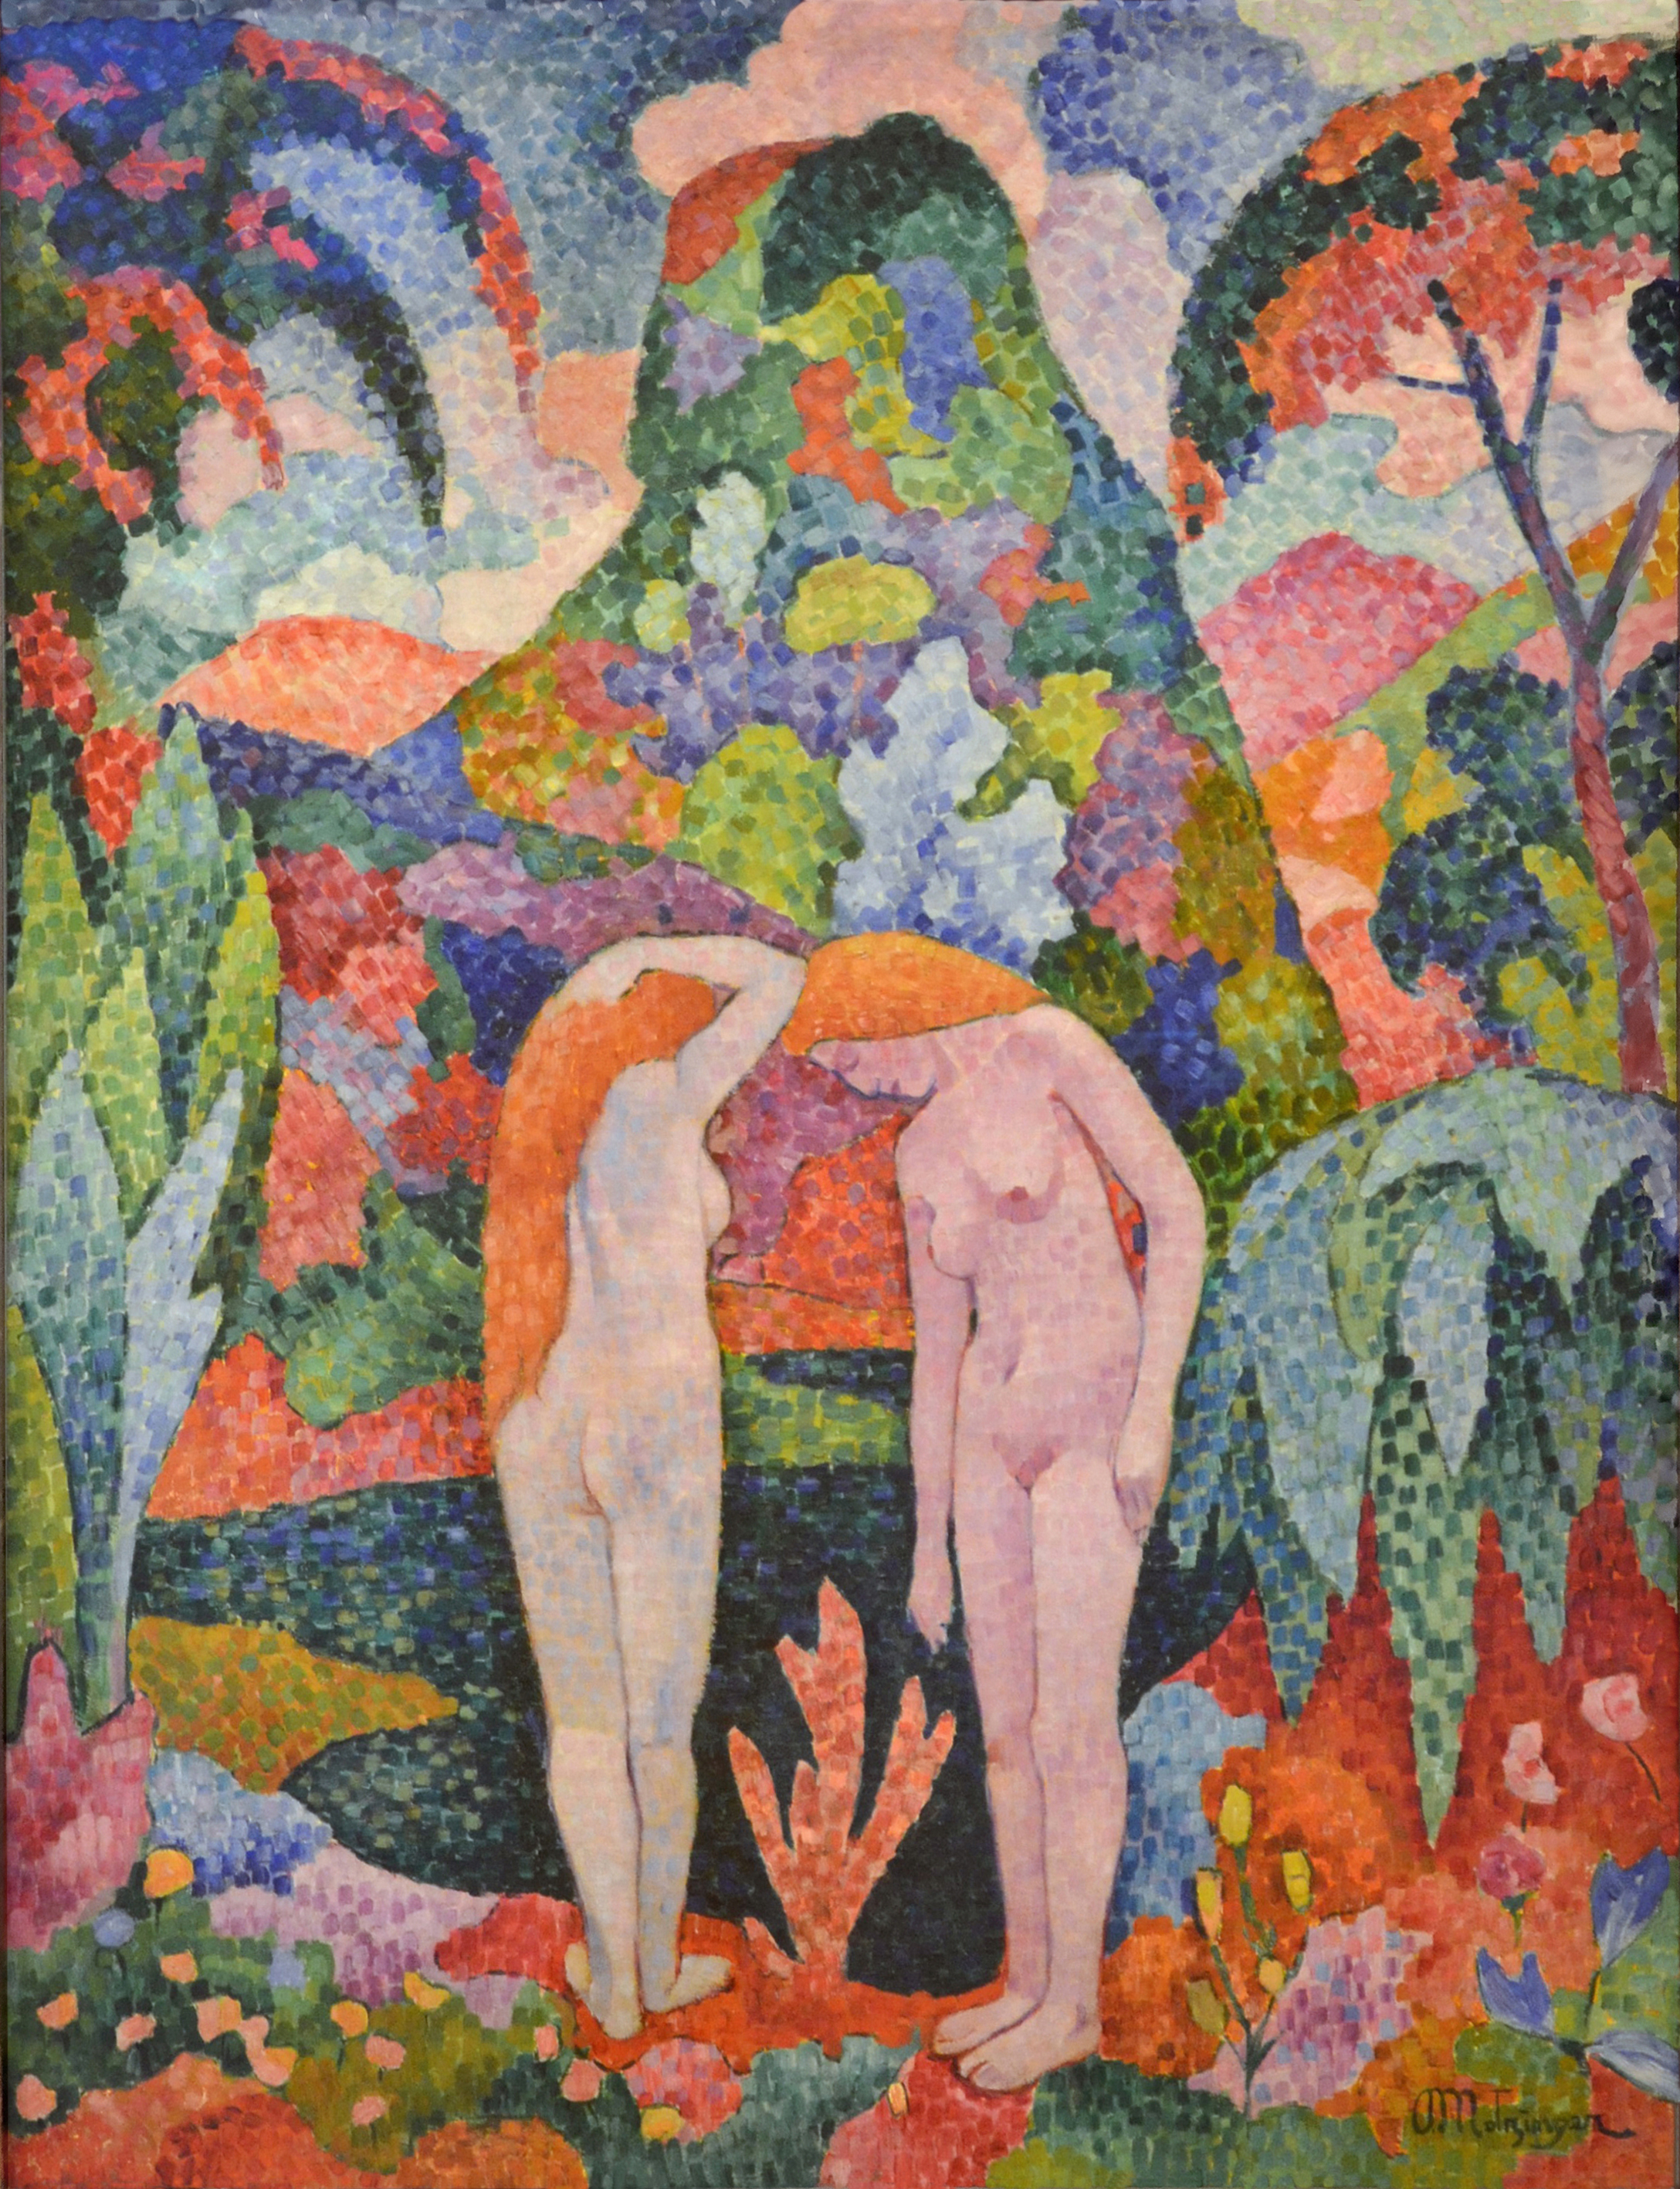 Nude paintings in nature: Jean Metzinger, Two Nudes in an Exotic Landscape, ca. 1905, private collection. Wikimedia Commons.